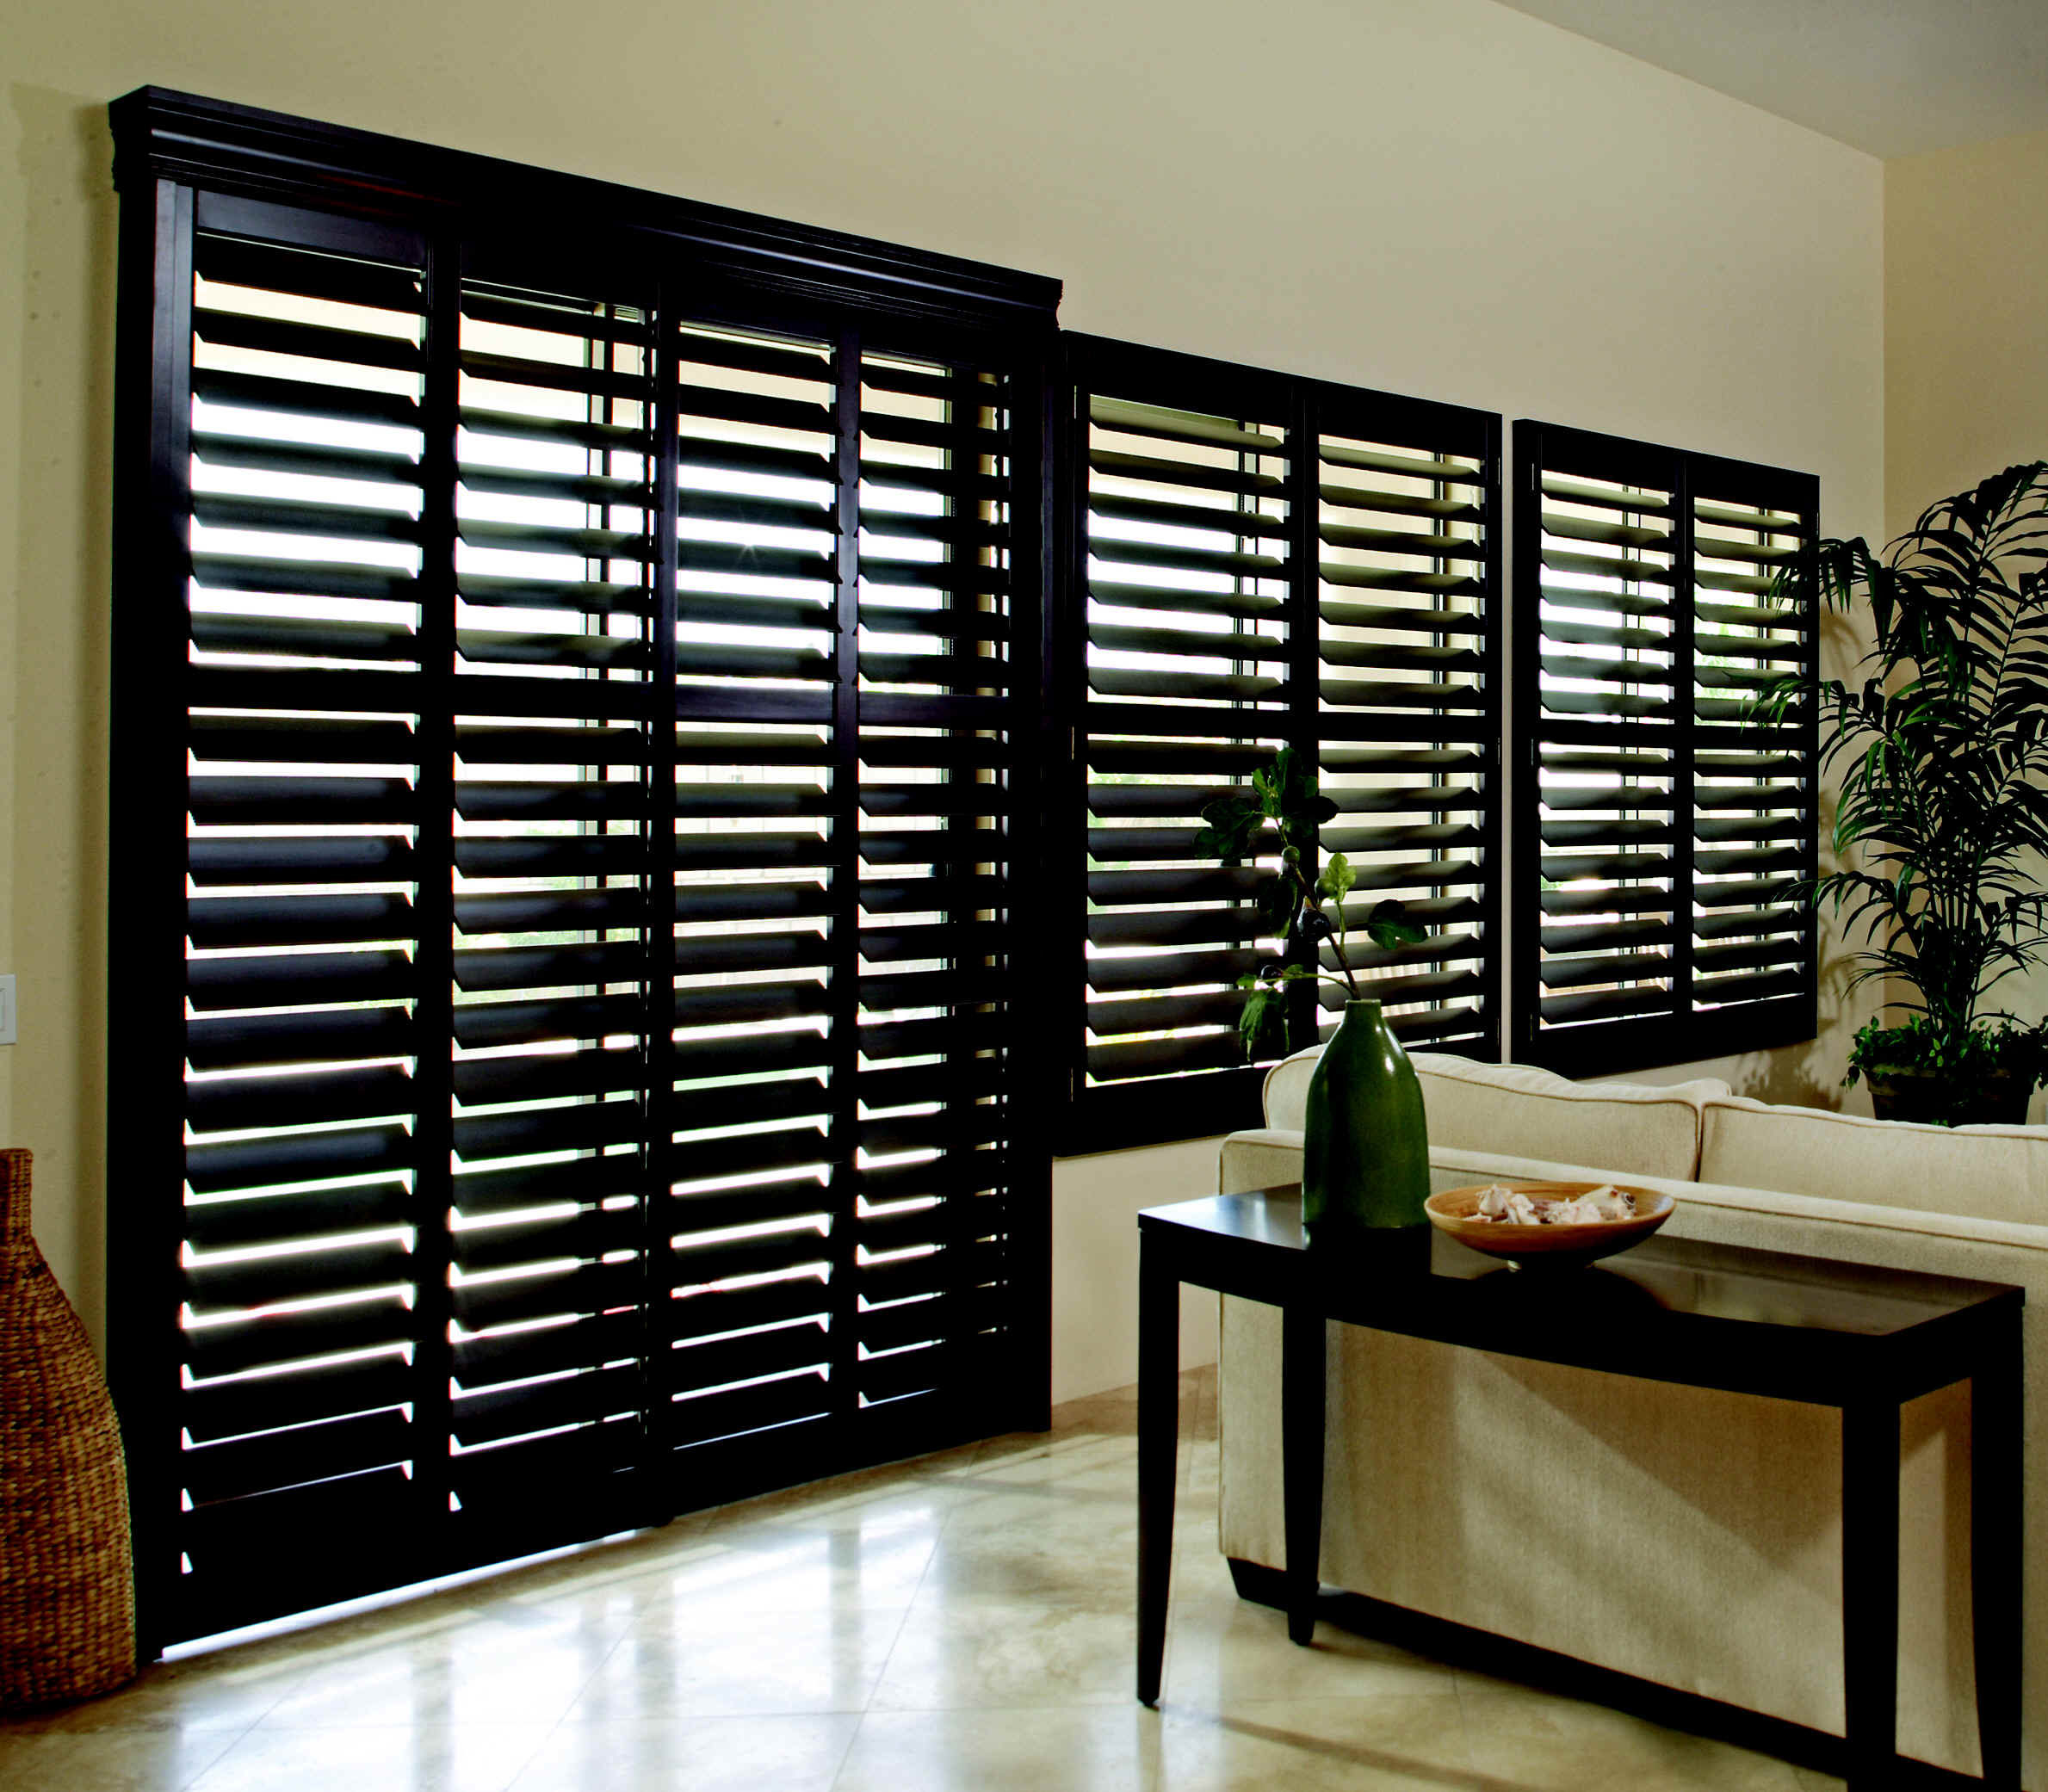 Clearview Shutters For Sale At Low Prices in Union